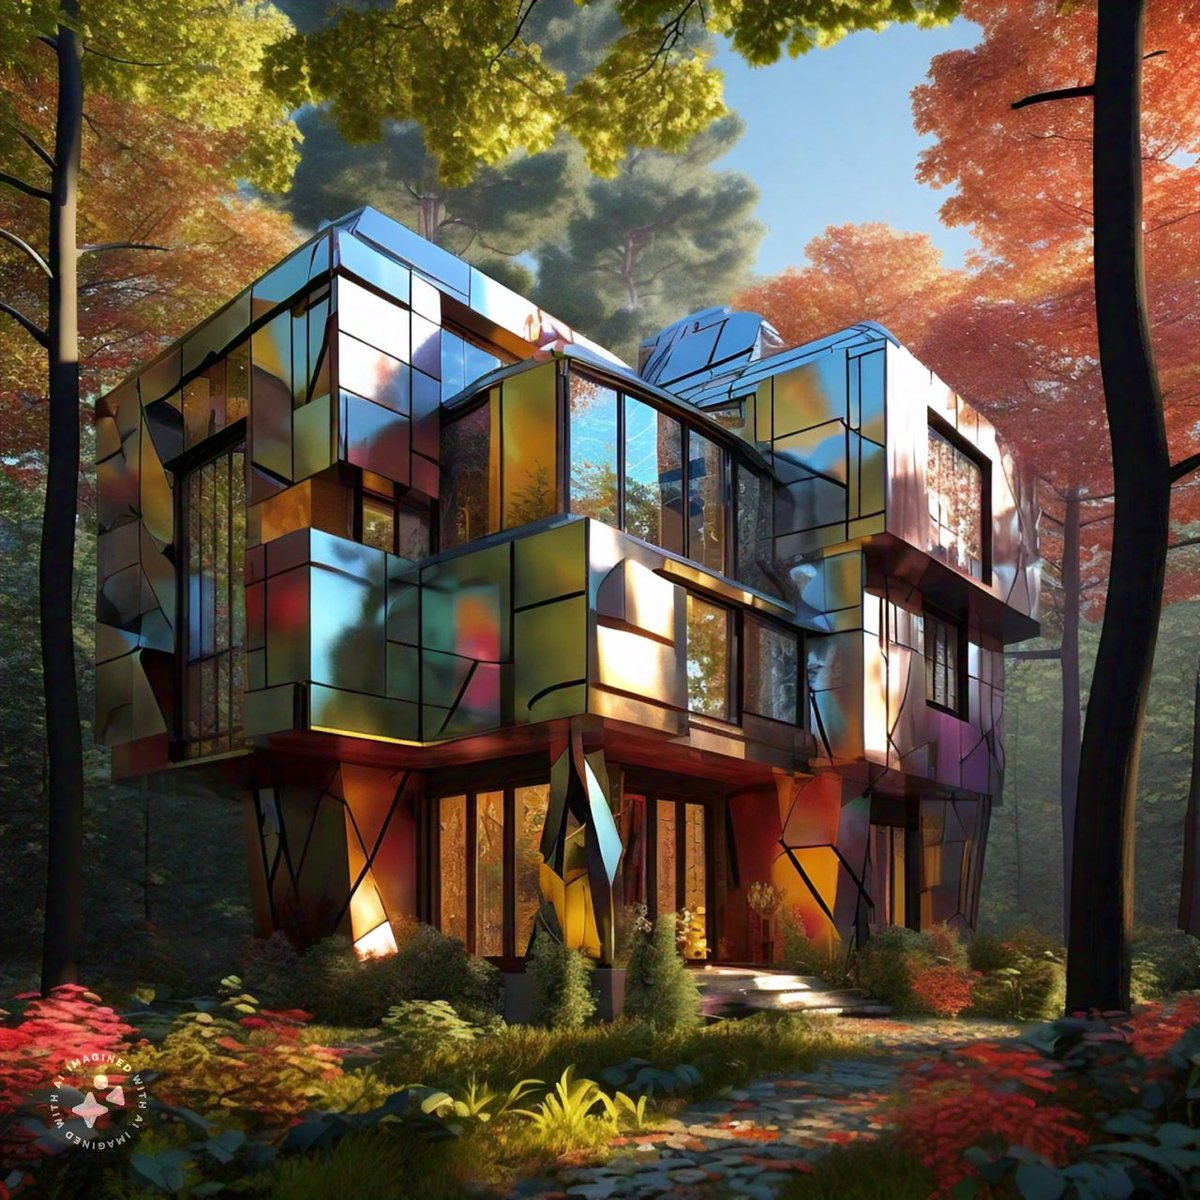 Mid morning prompt share: Futuristic cubism abstract, Family home, in the woods